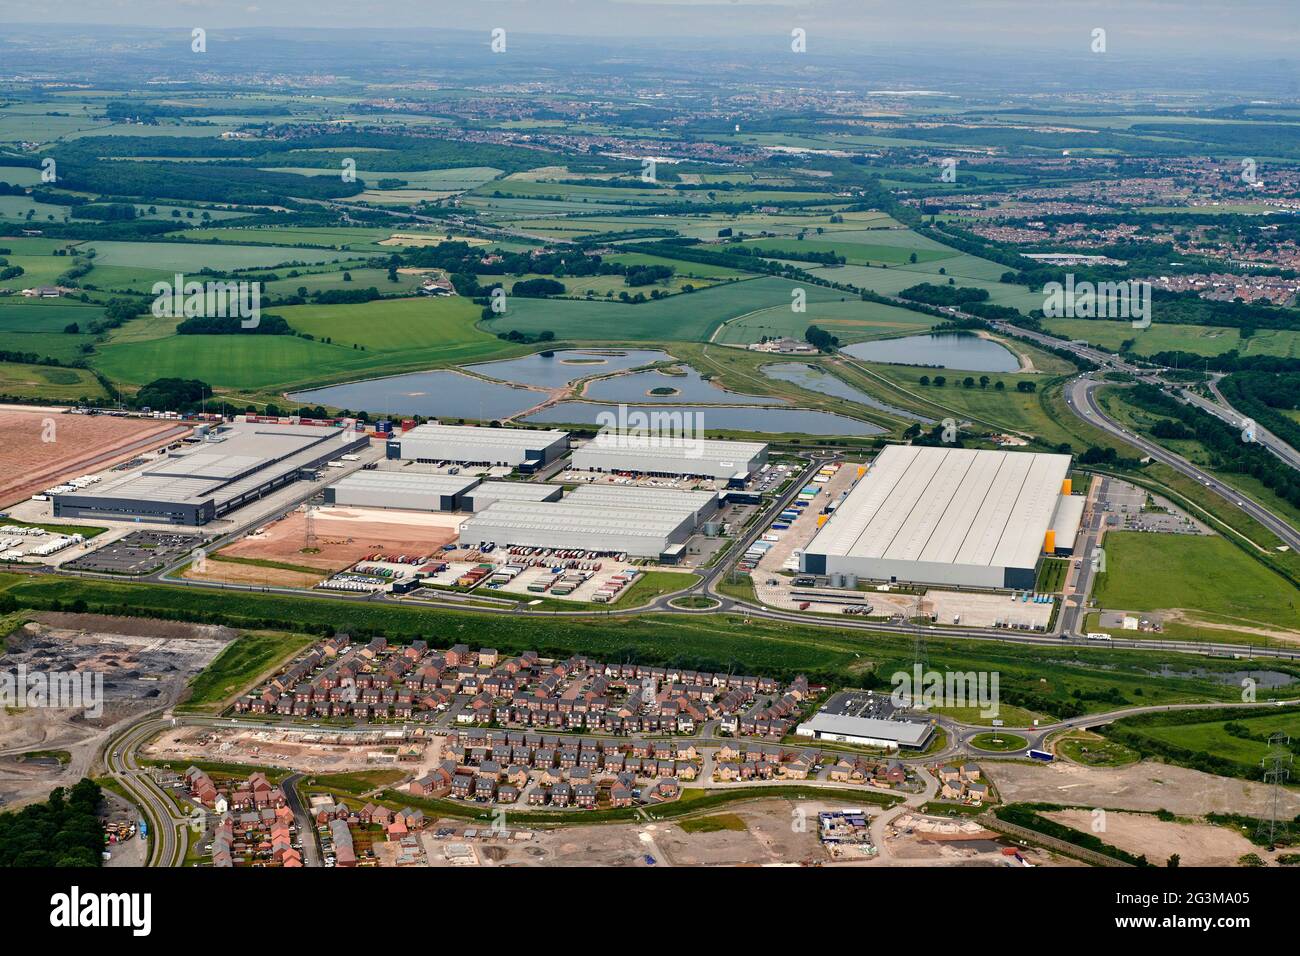 An aerial view of Doncaster iport distribution centre, South Yorkshire, northern England, UK, Amazon shed dominant Stock Photo